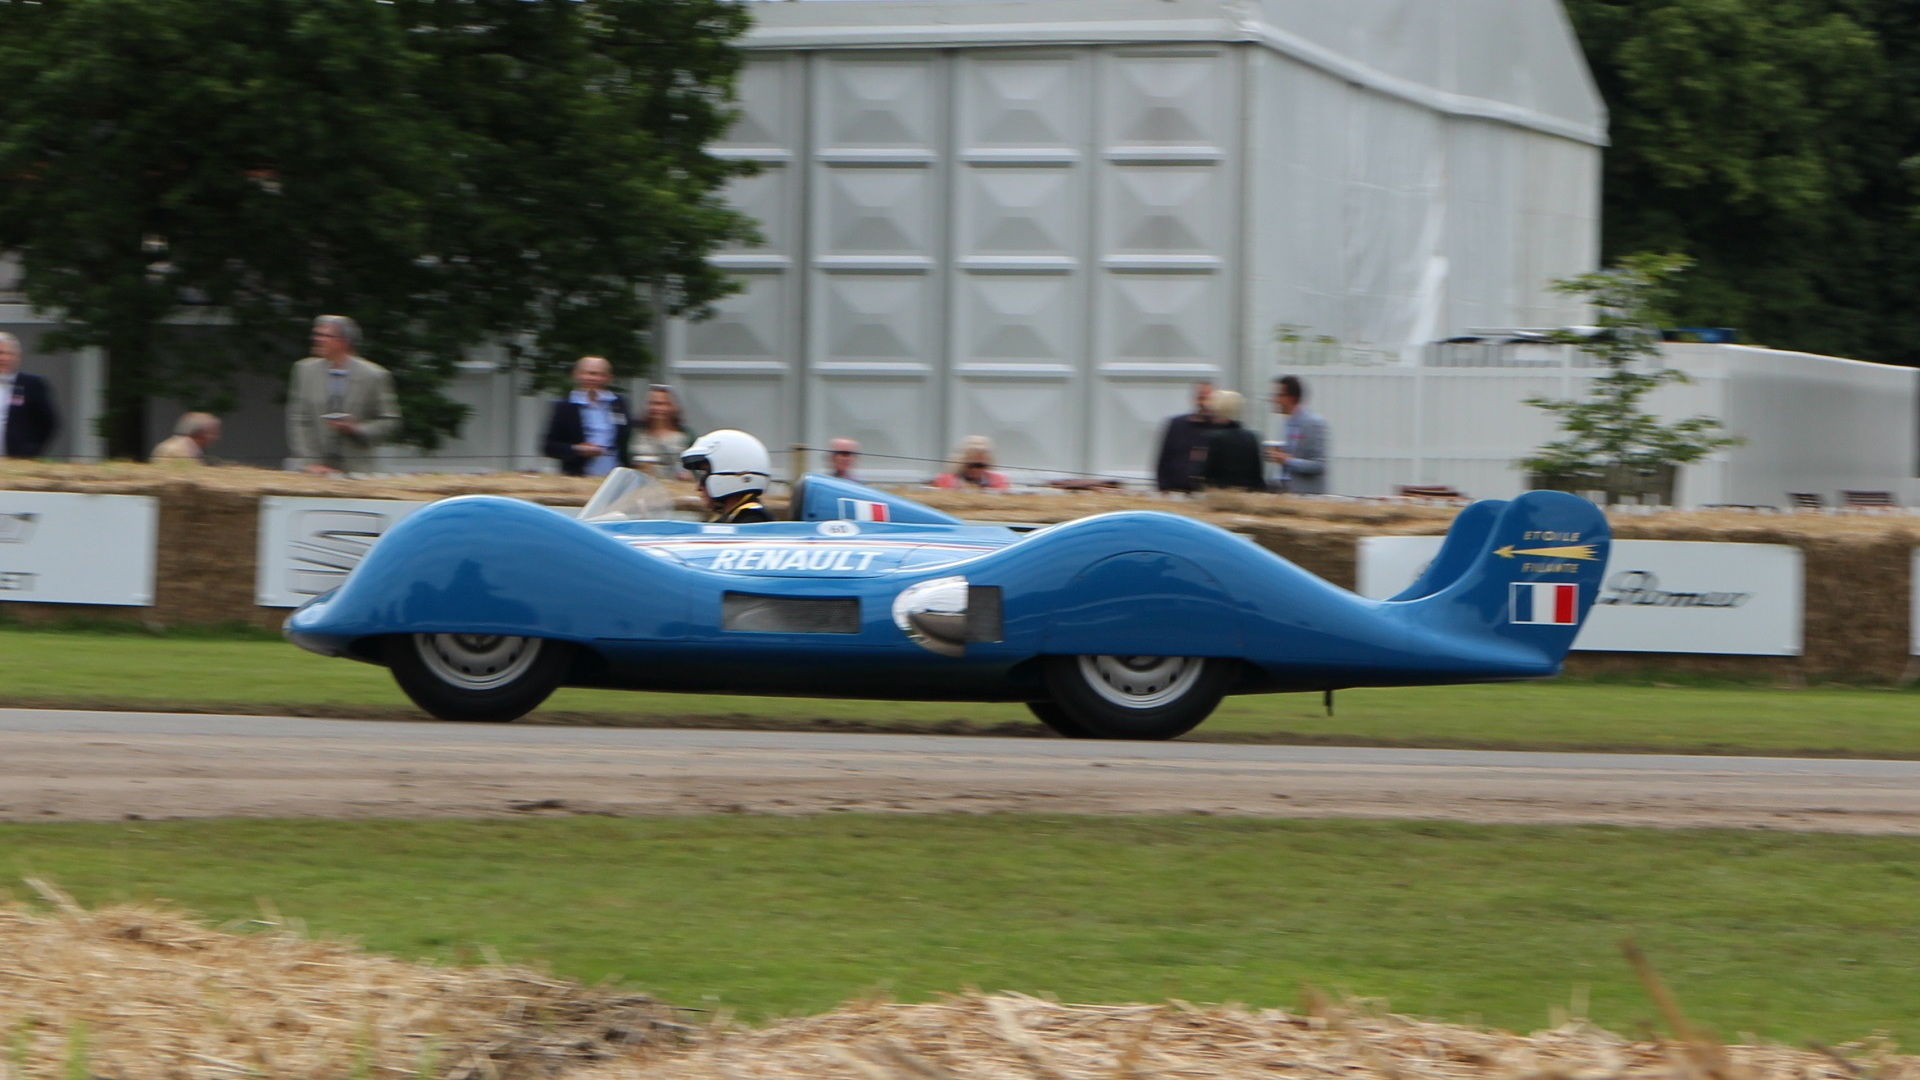 1956 Renault Etroile Filante turbine Land Speed Record contender at 2016 Goodwood Festival of Speed